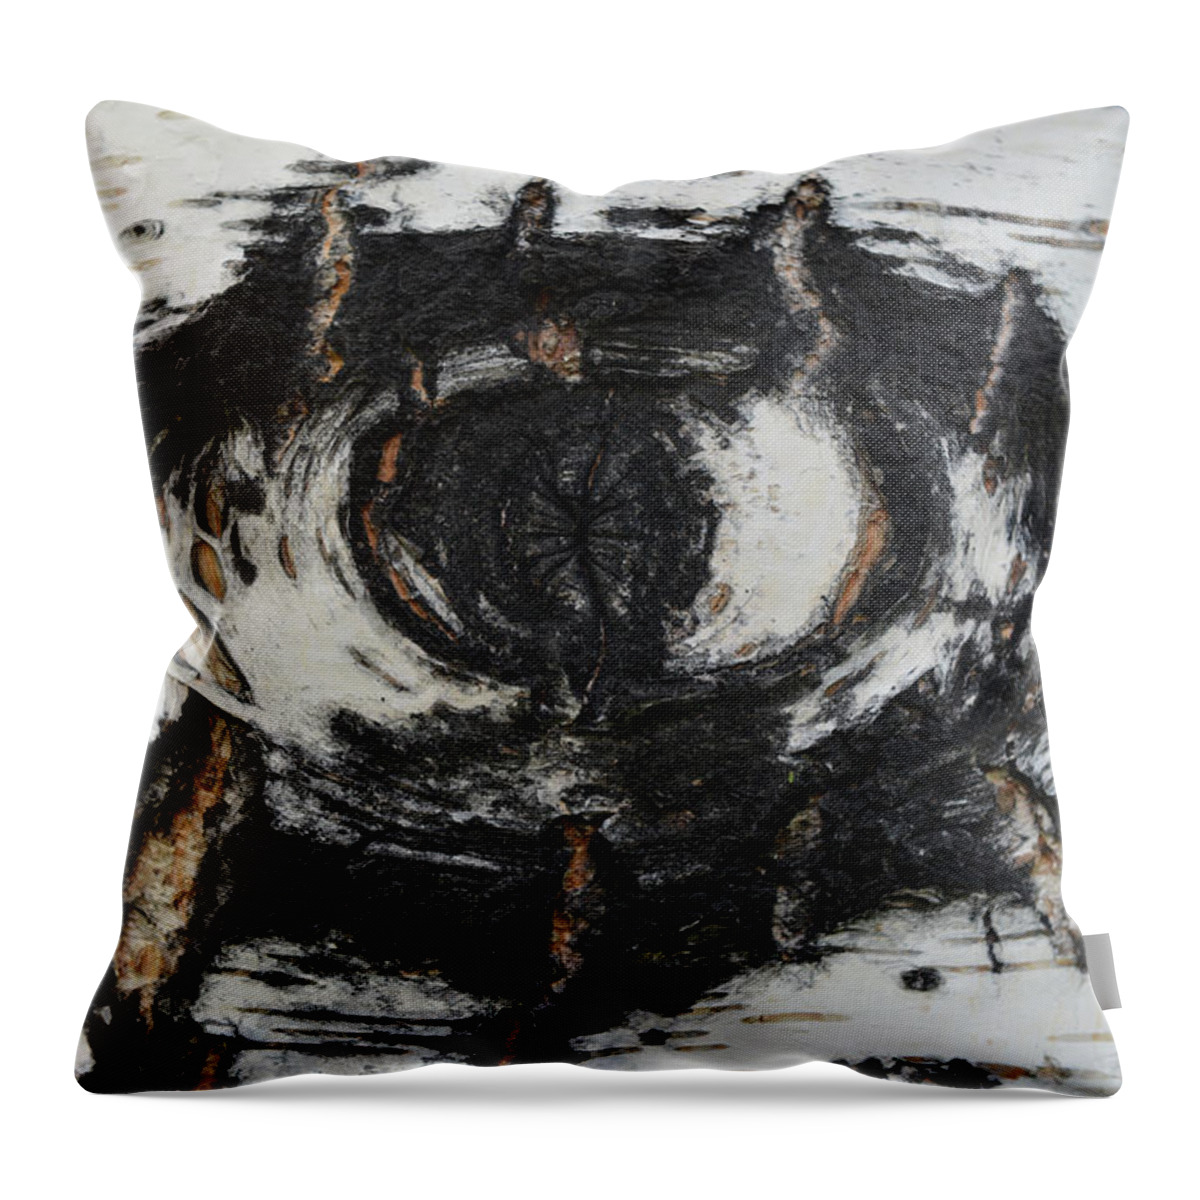 Banff Throw Pillow featuring the photograph The Eye by Yue Wang